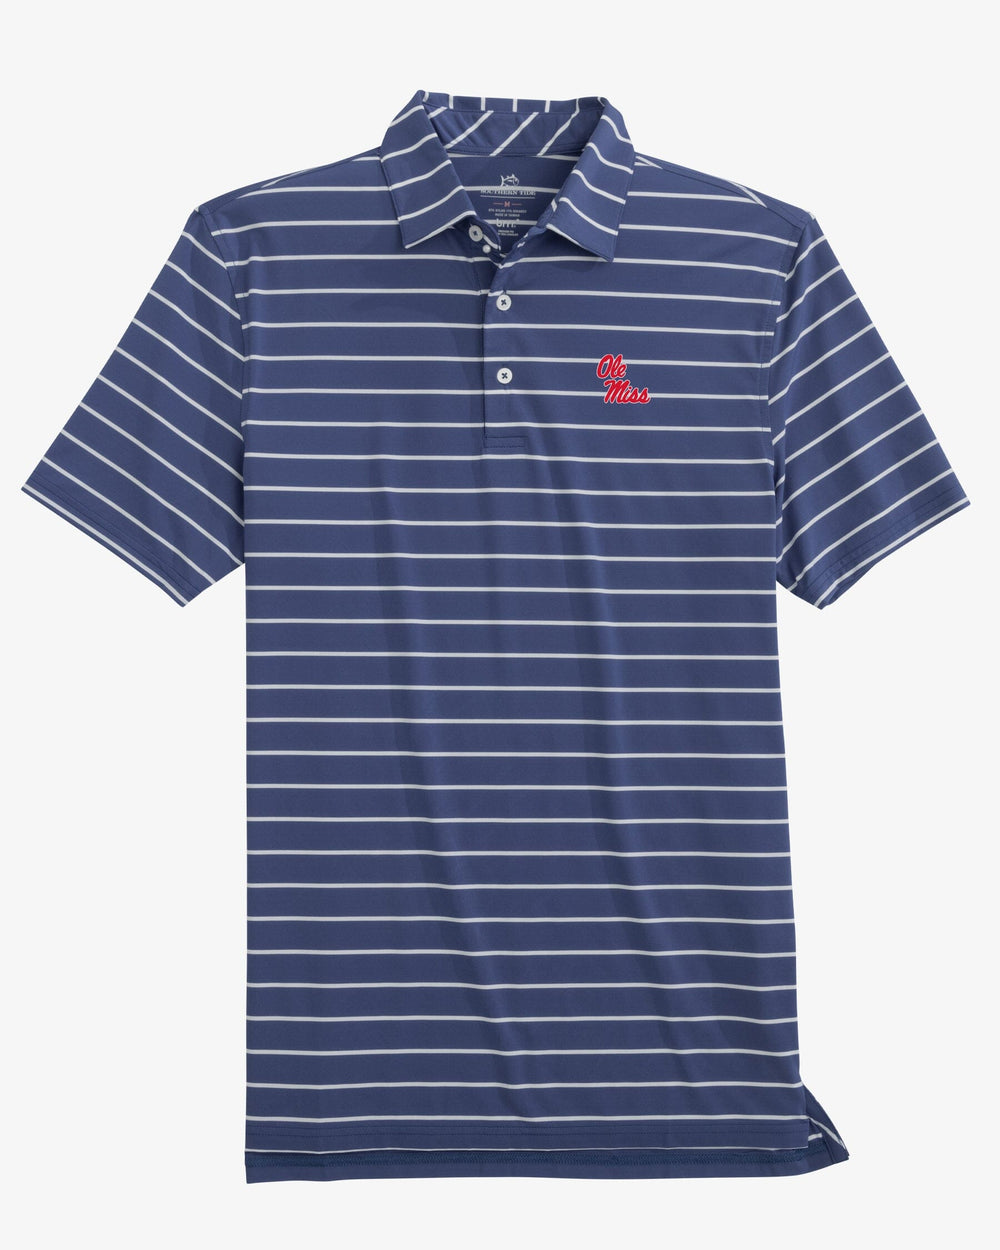 The front view of Ole Miss Rebels Brreeze Desmond Stripe Performance Polo by Southern Tide - Navy